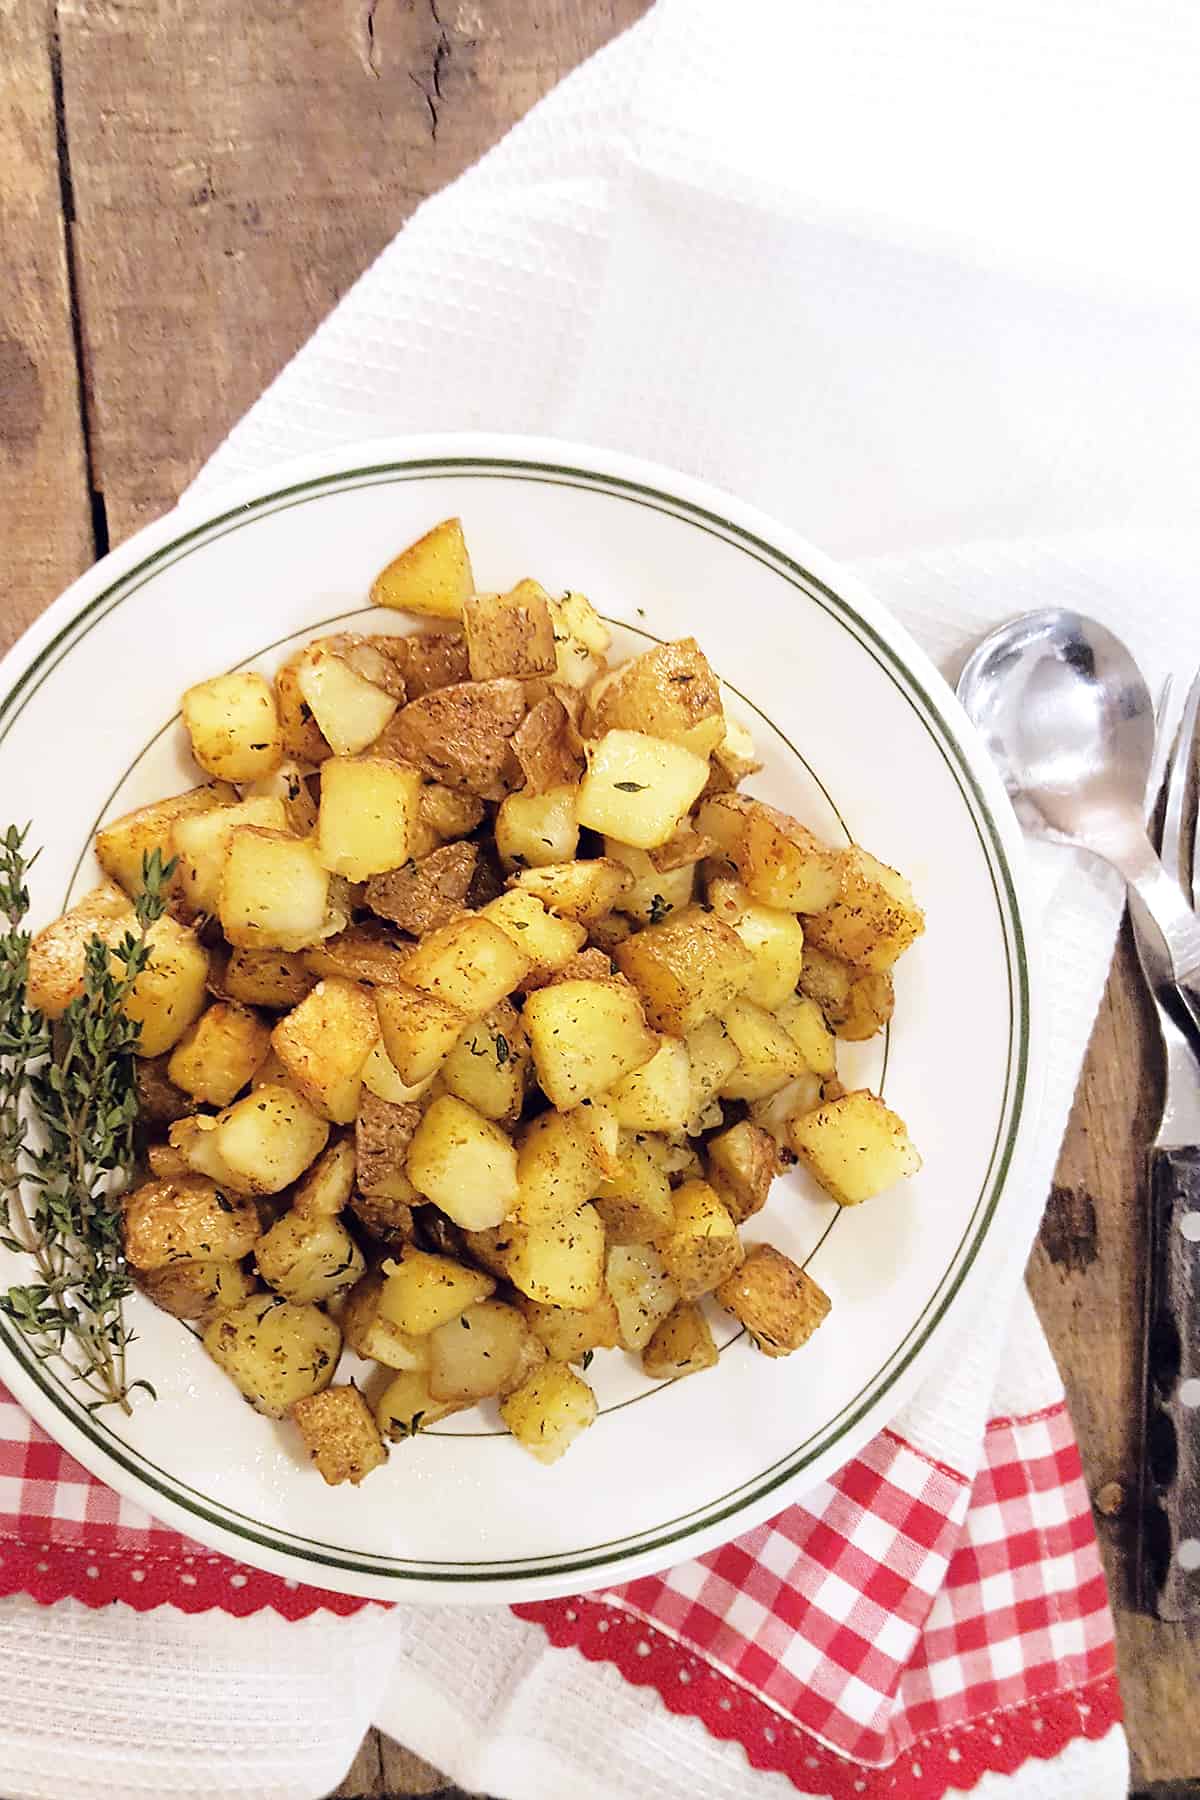 Home fries on a white serving plate.